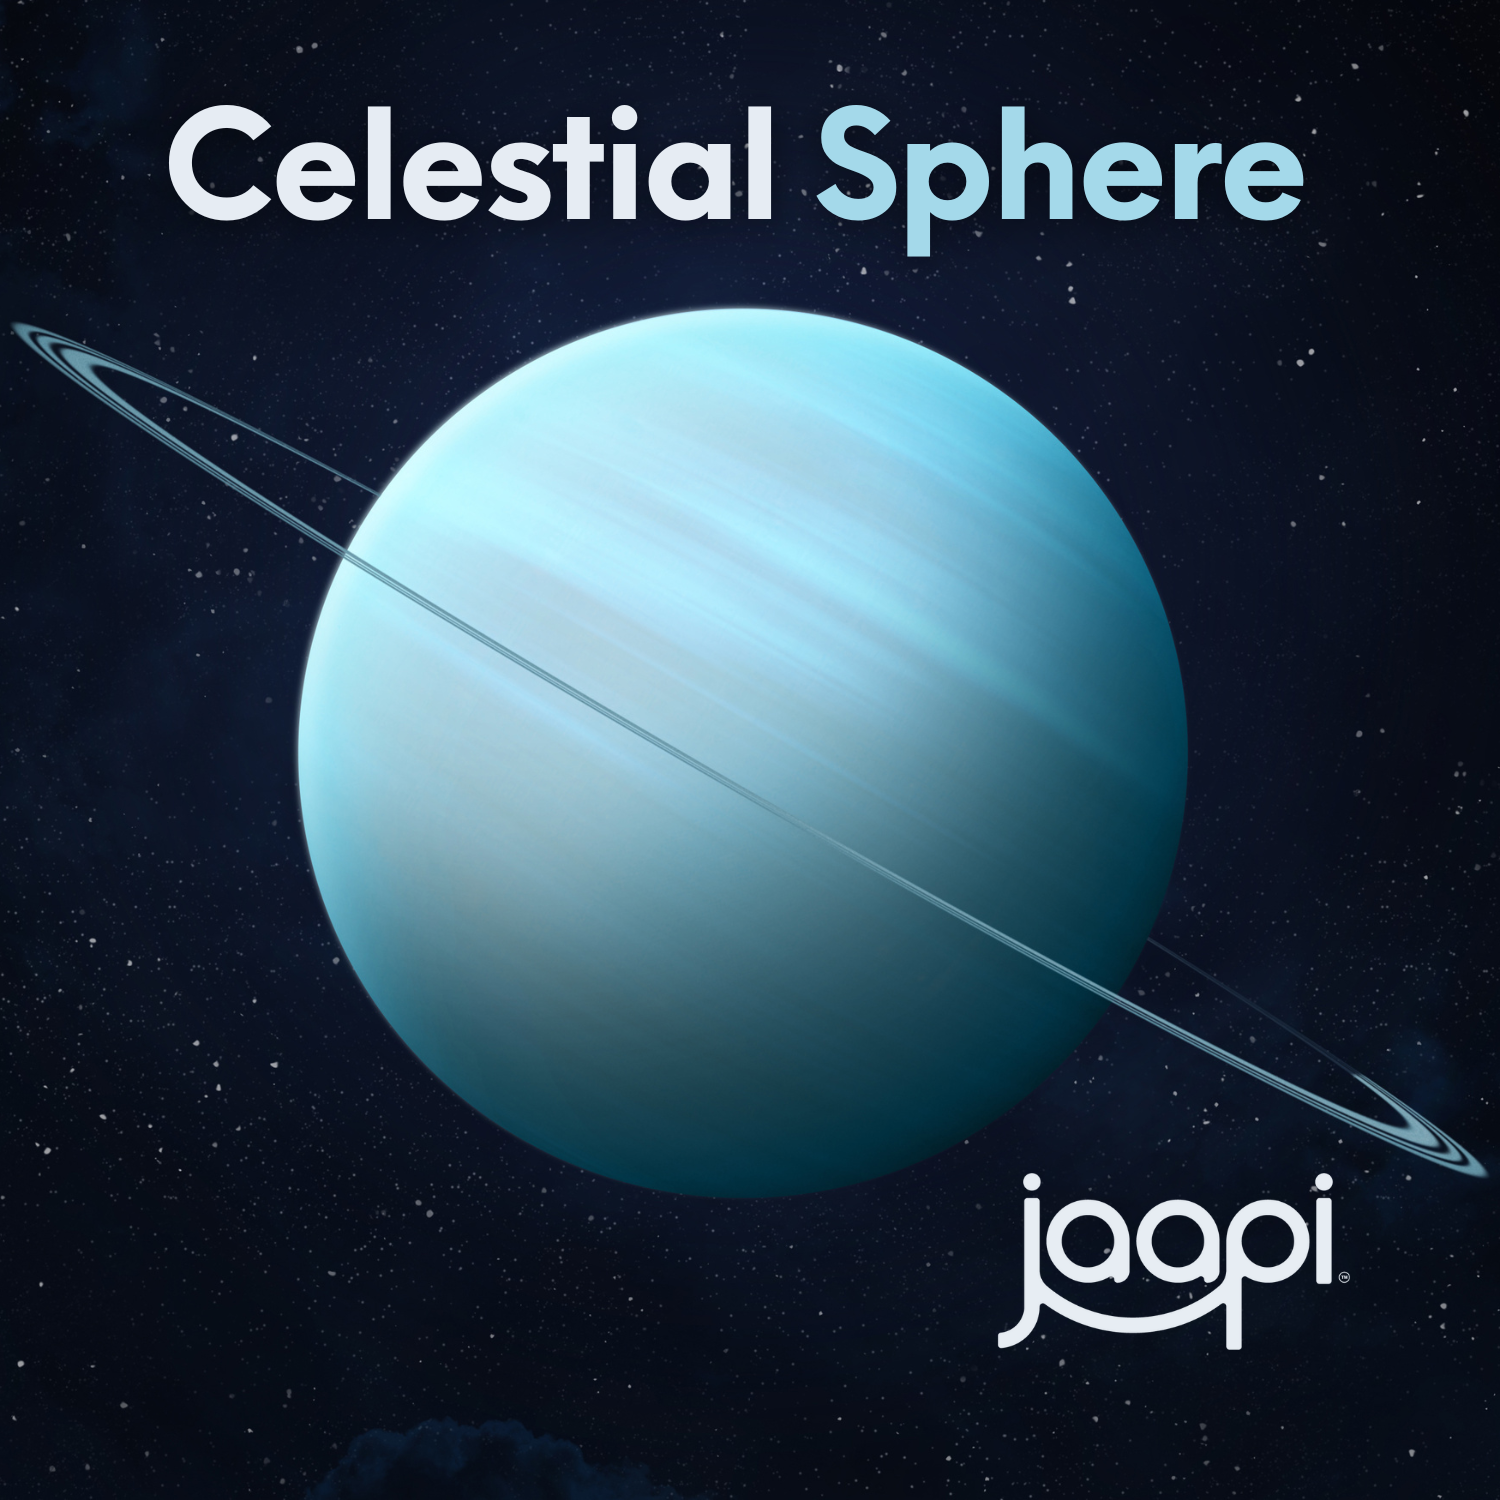 Celestial Sphere: Exploring the more celestial side of ambient -- chilled beats included. Curated by Jaapi Media.